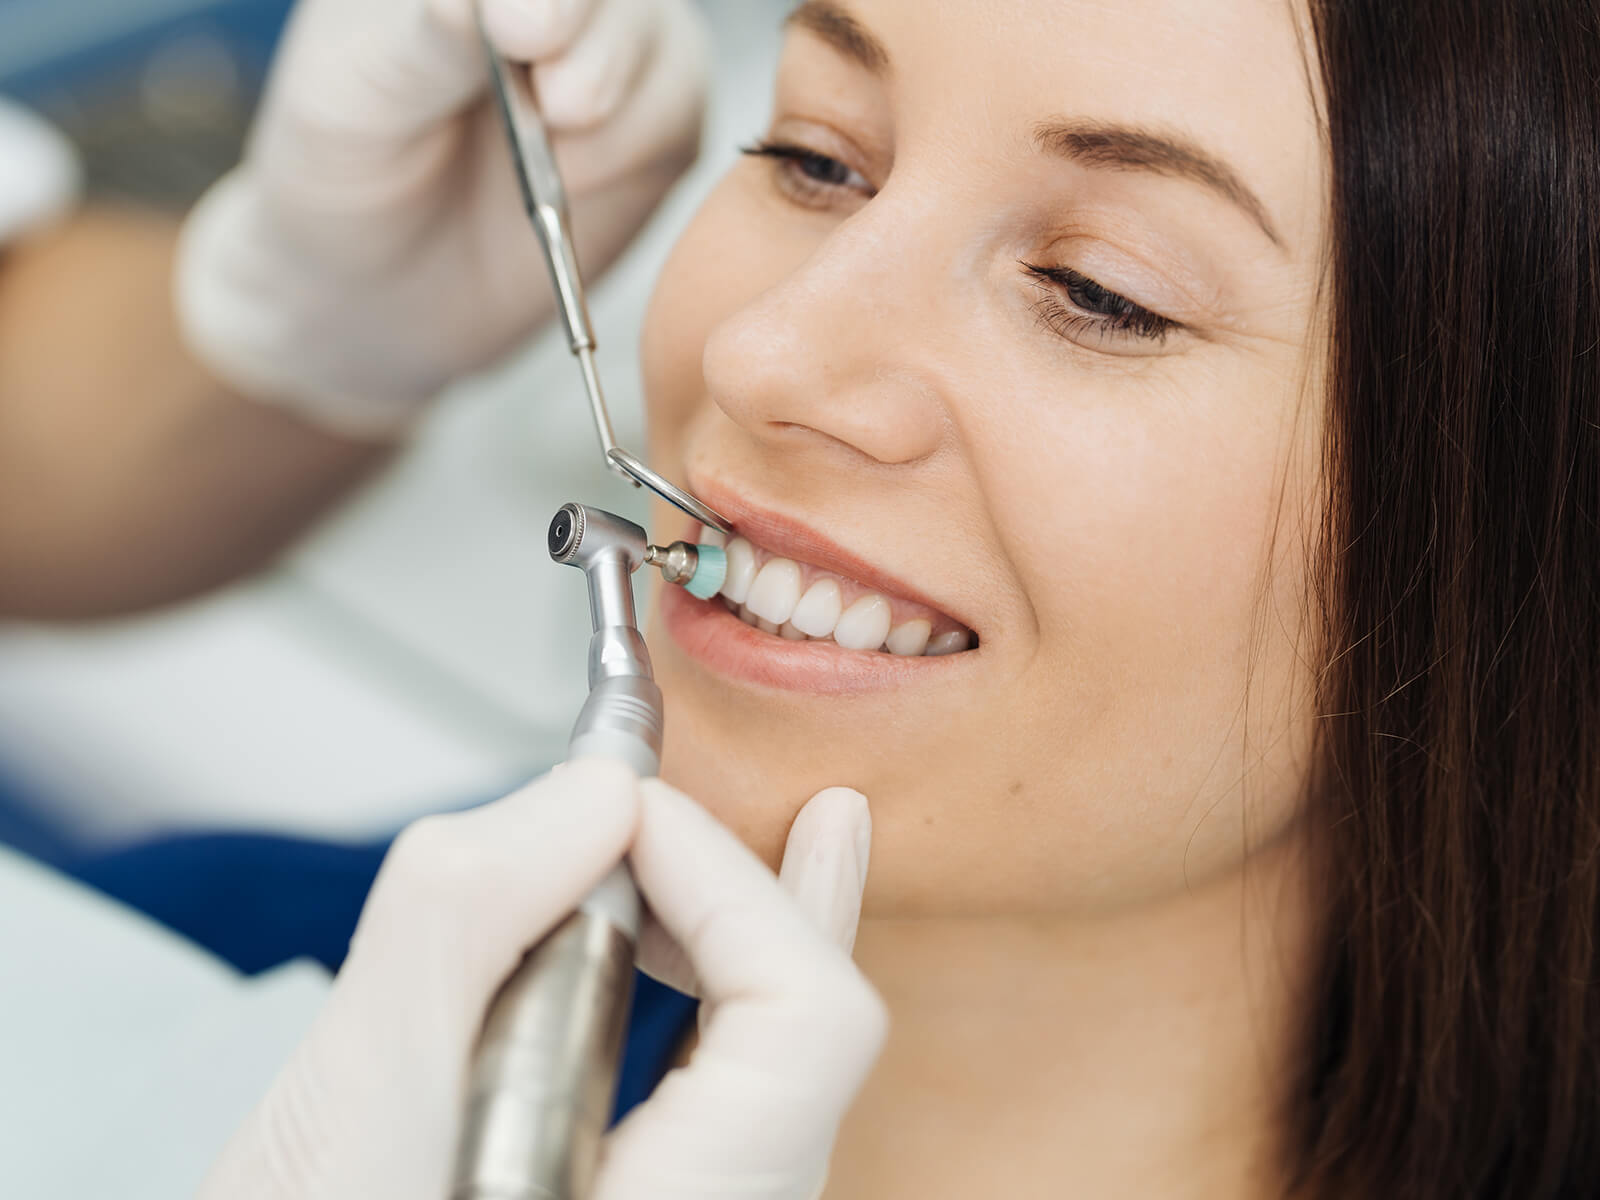 Are Professional Teeth Cleanings Painful?